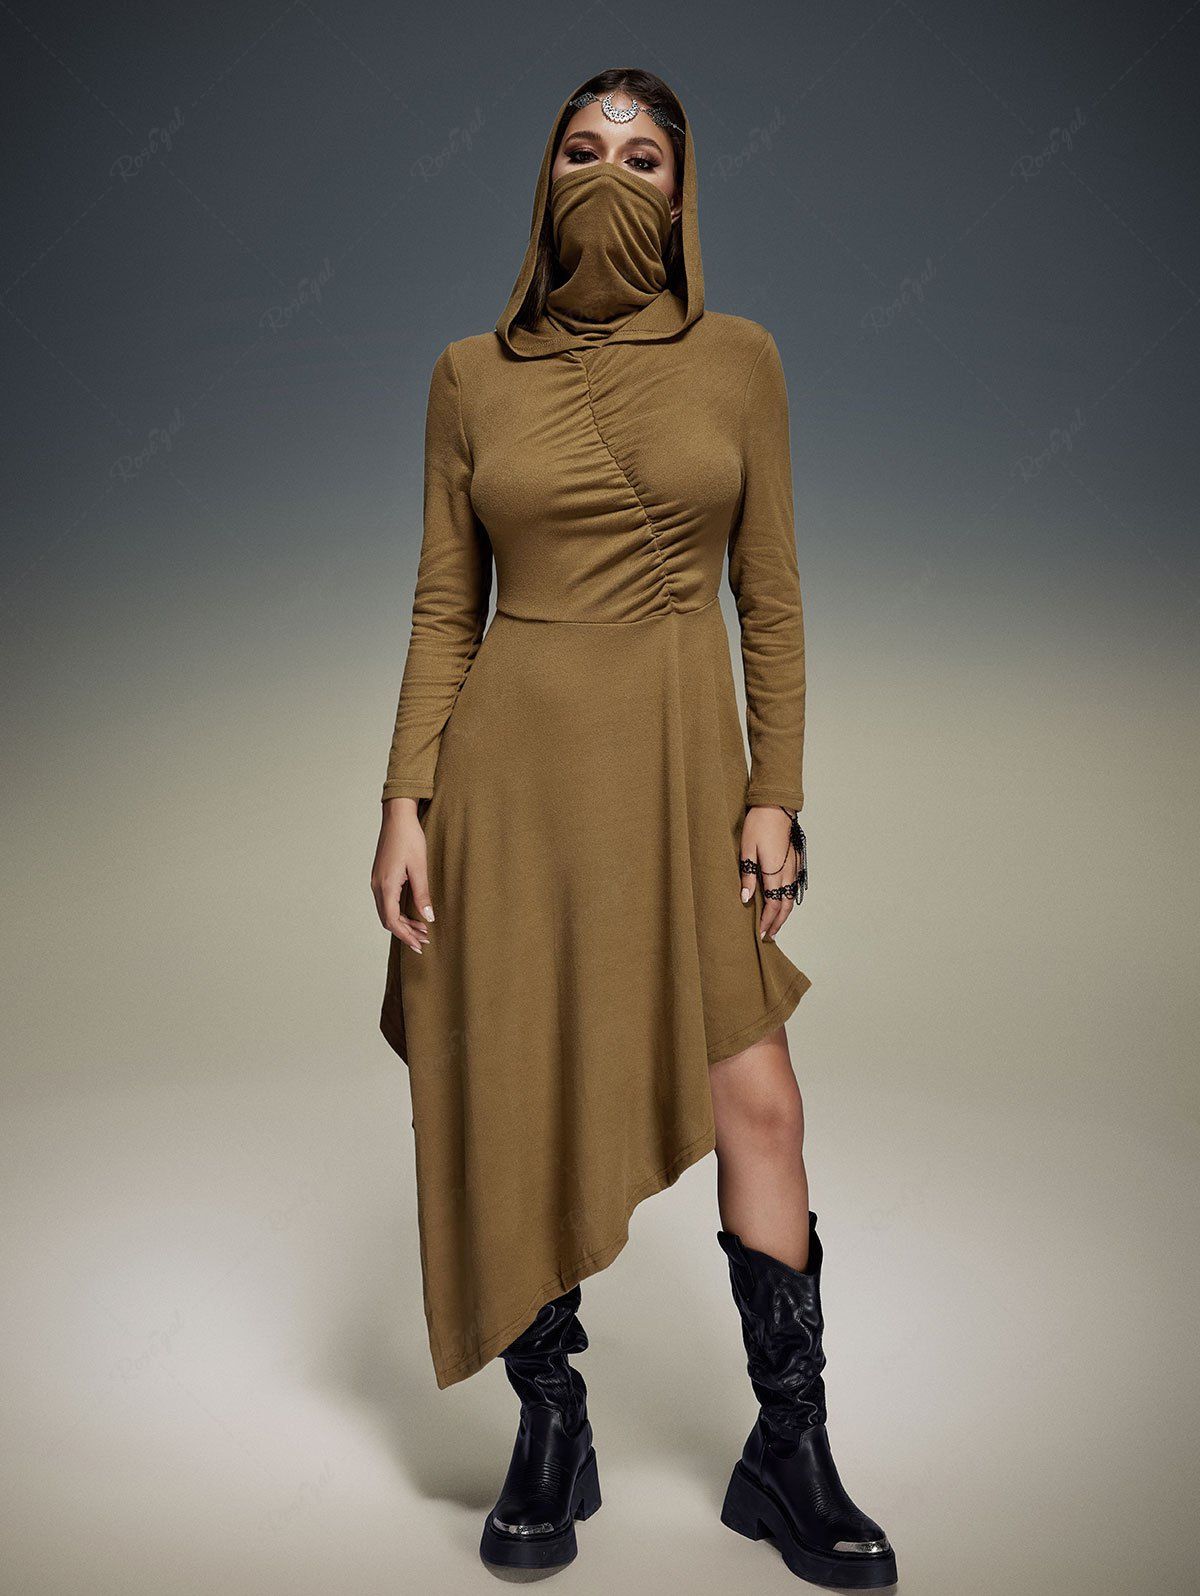 Post-Apocalyptic Style Gothic Cowl Neck Ruched Asymmetric Hooded Solid Dress